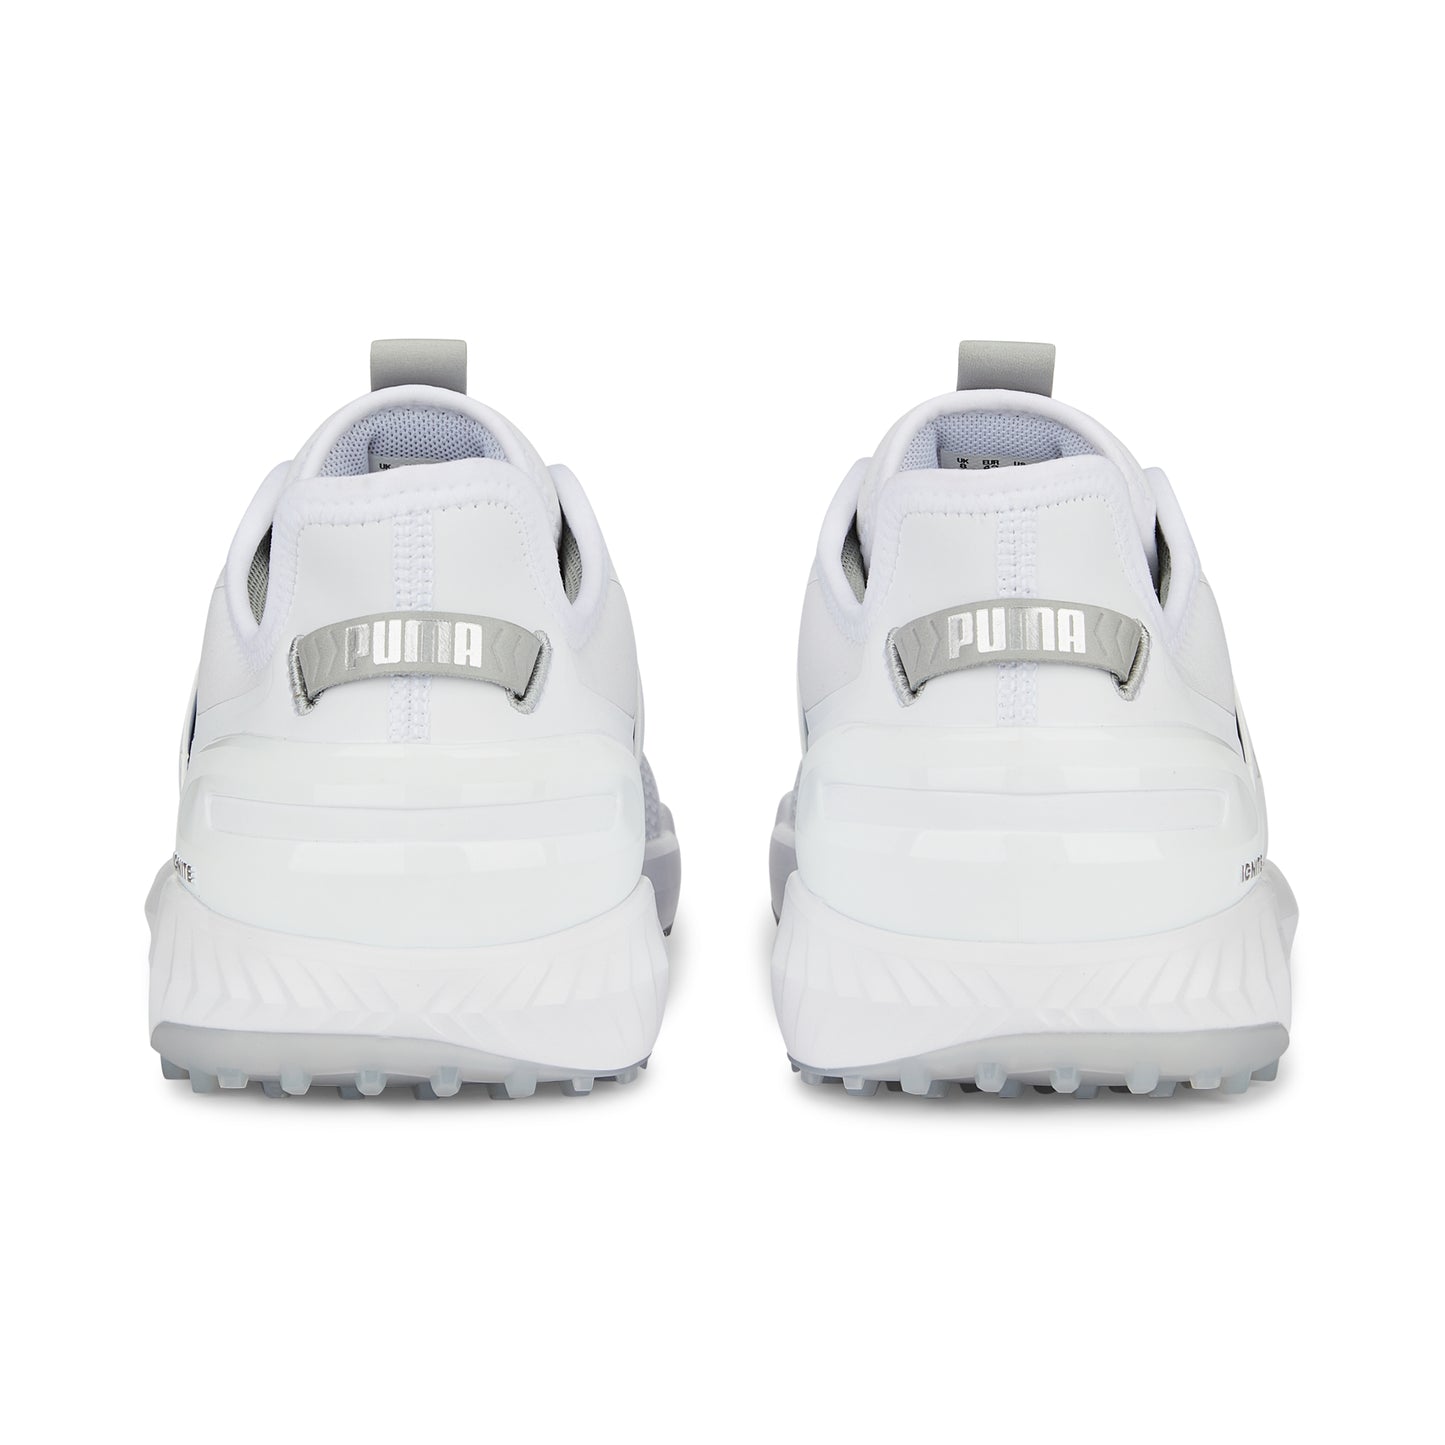 Puma Men's Ignite Elevate Wide Spikeless Golf Shoes - White/Silver